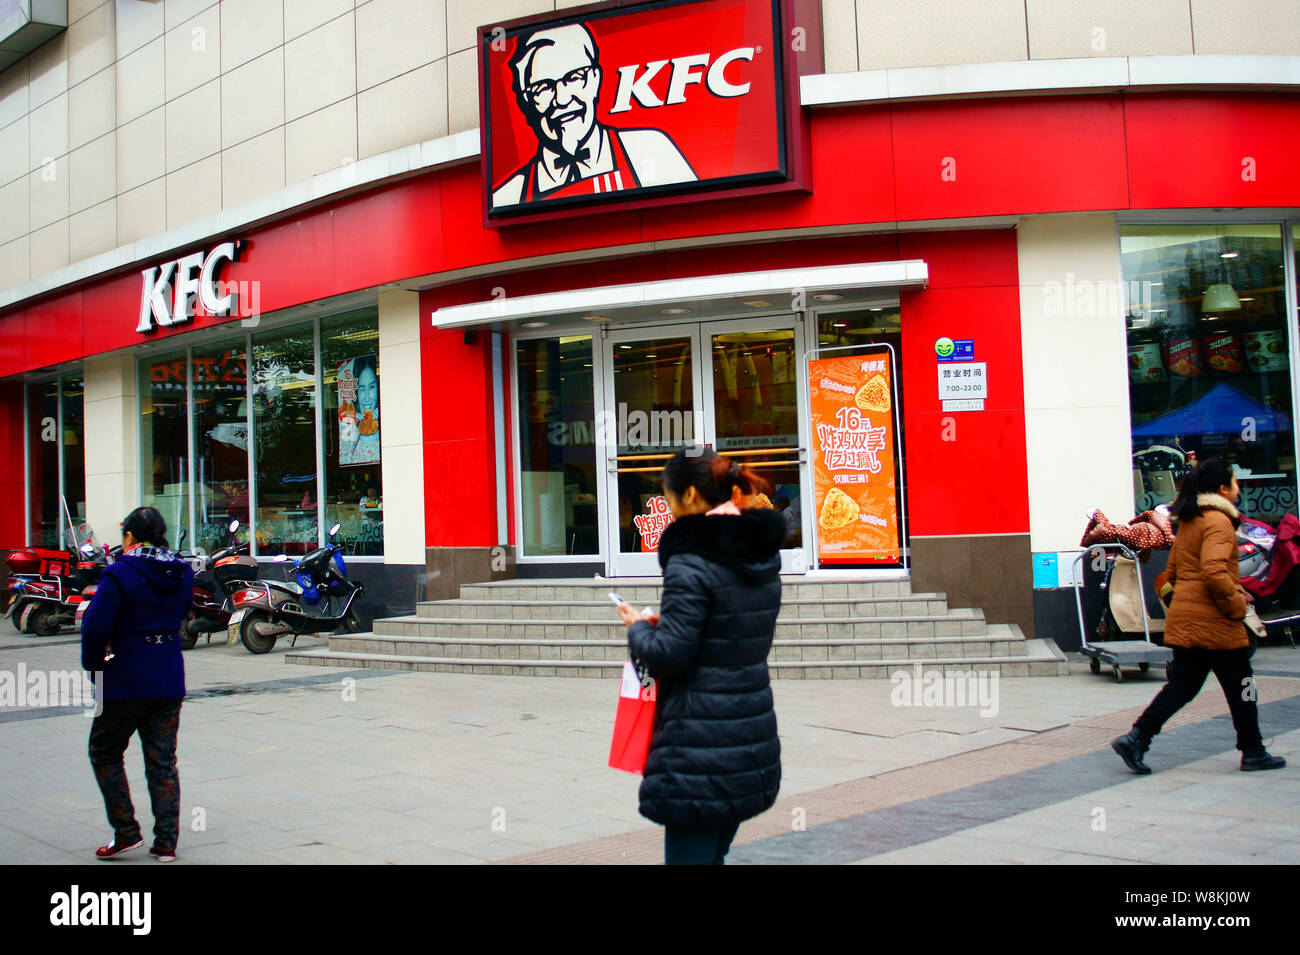 File Pedestrians Walk Past A Fastfood Restaurant Of Kfc In Yichang City Central Chinas Hubei Province 13 January 2016 One Of Chinas Largest W8KJ0W 